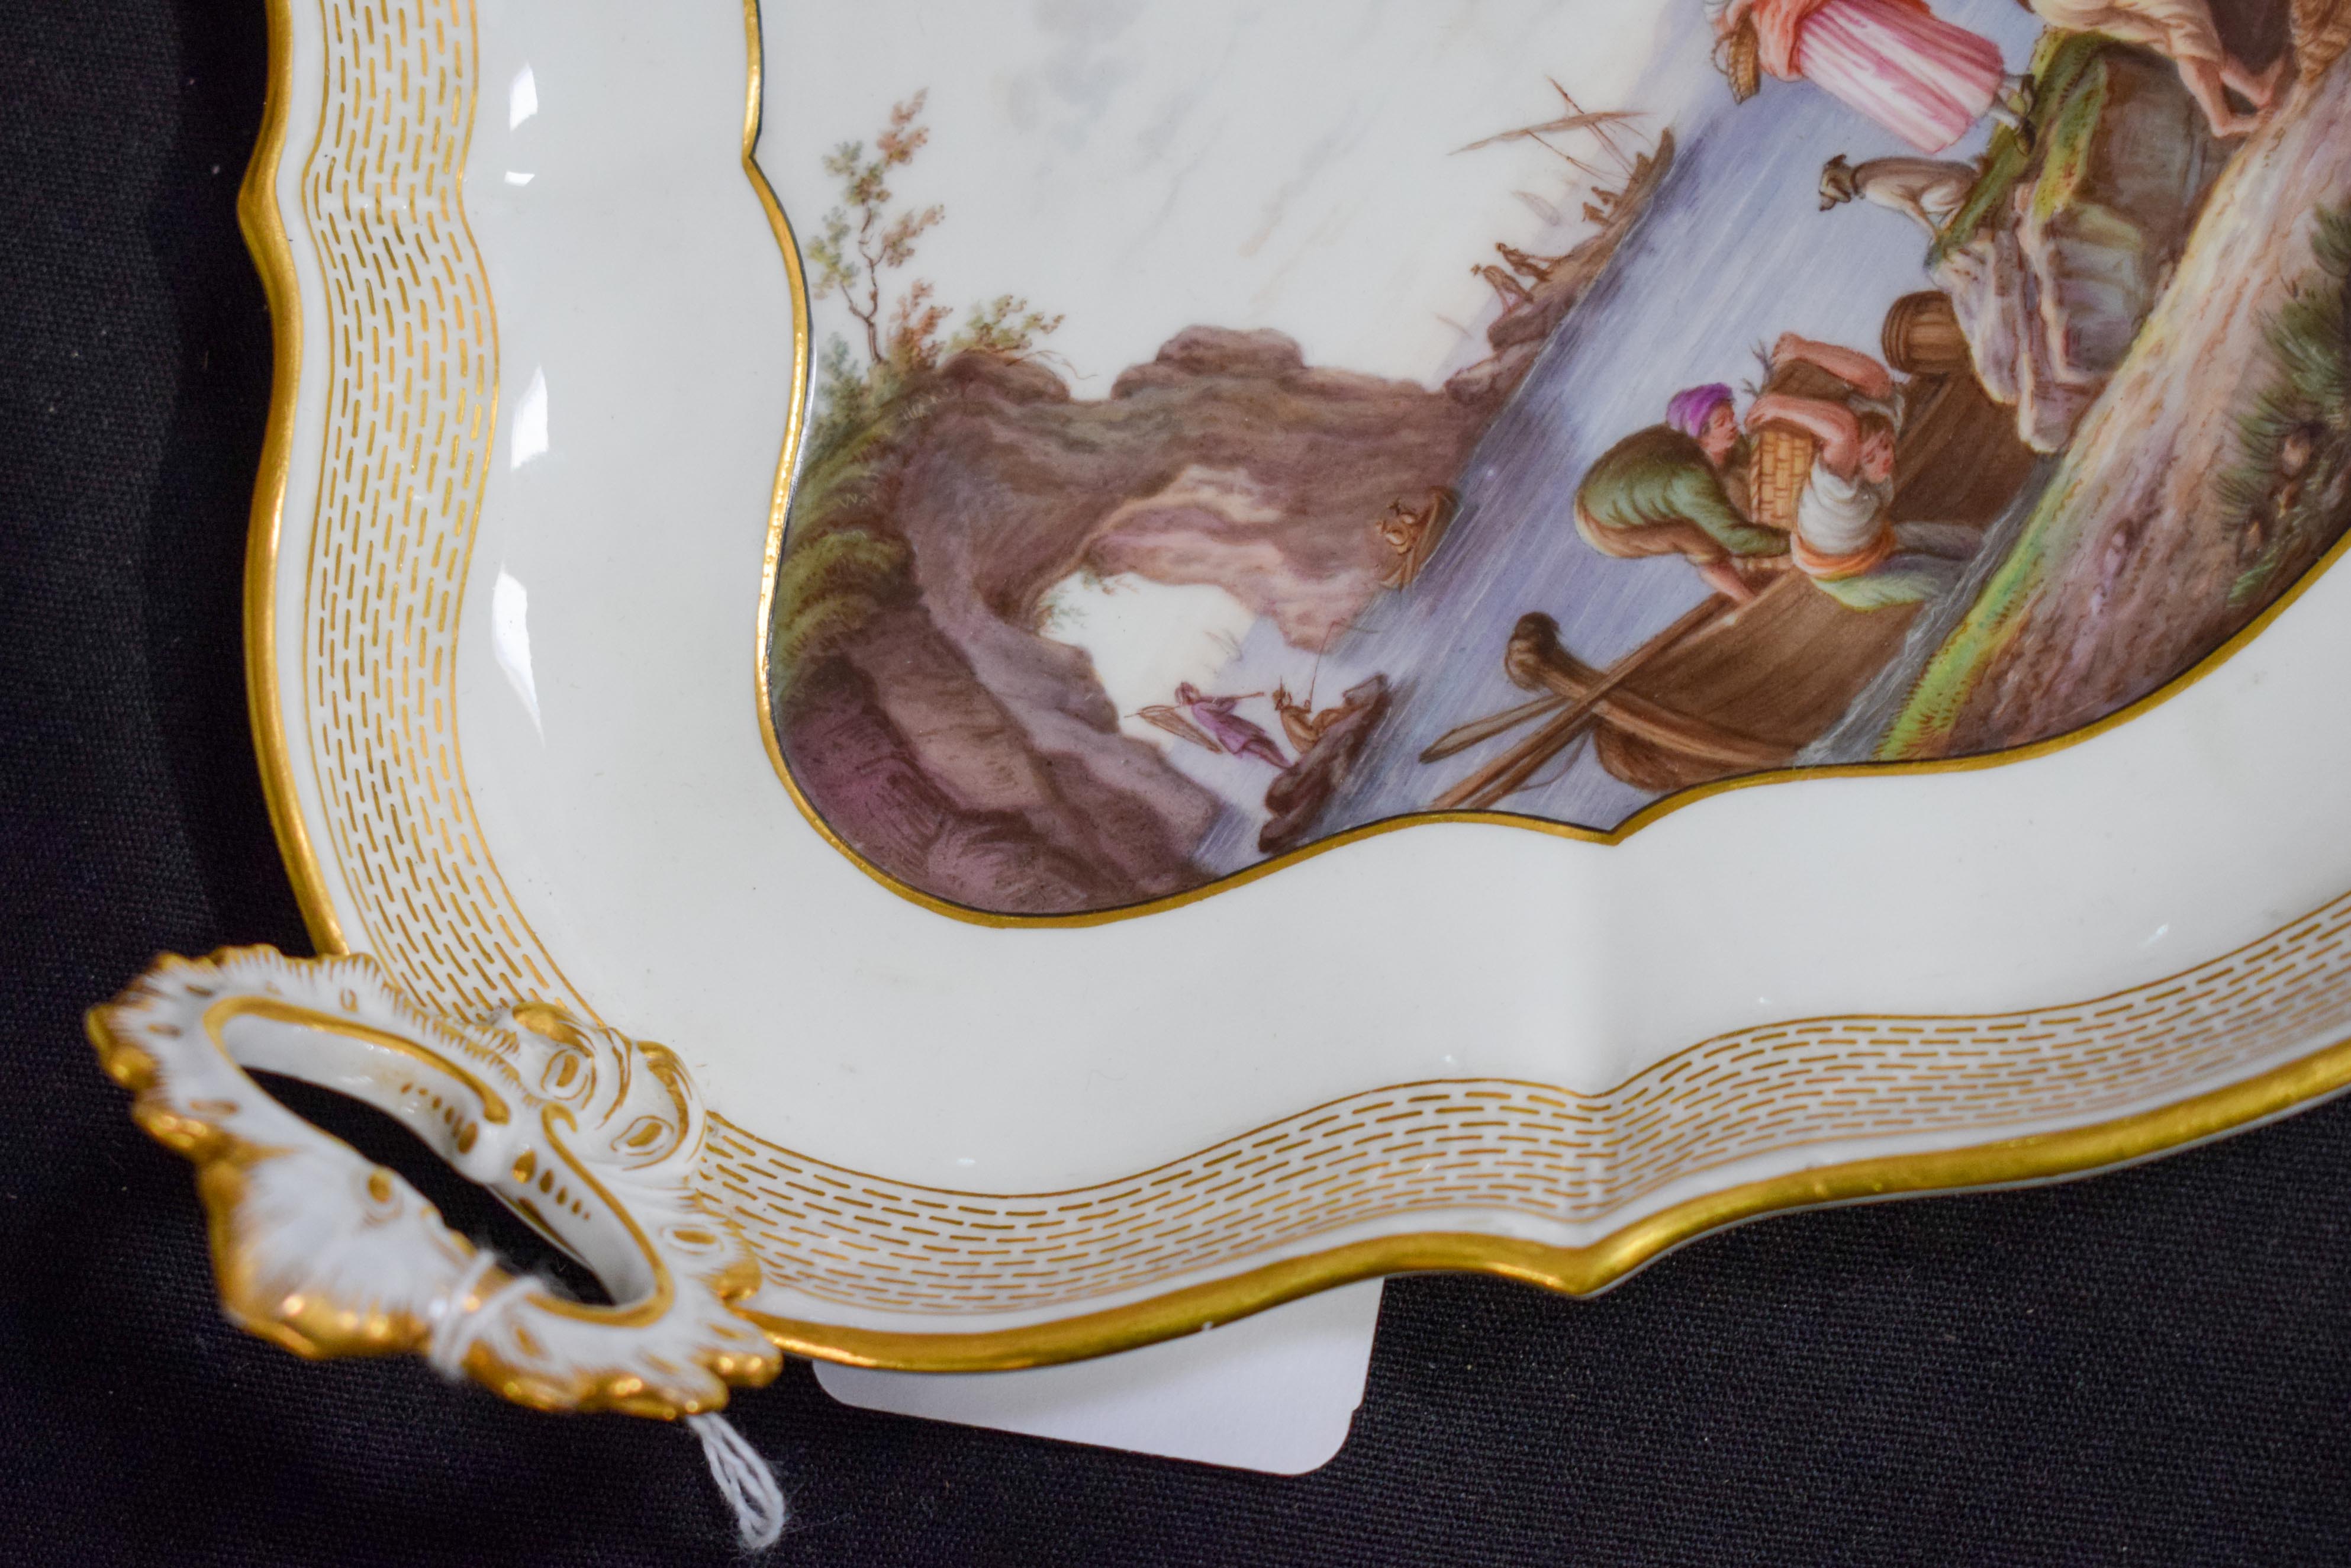 A FINE PAIR OF 18TH/19TH CENTURY MEISSEN TWIN HANDLED PORCELAIN DISHES painted with coastal views. 2 - Image 16 of 19